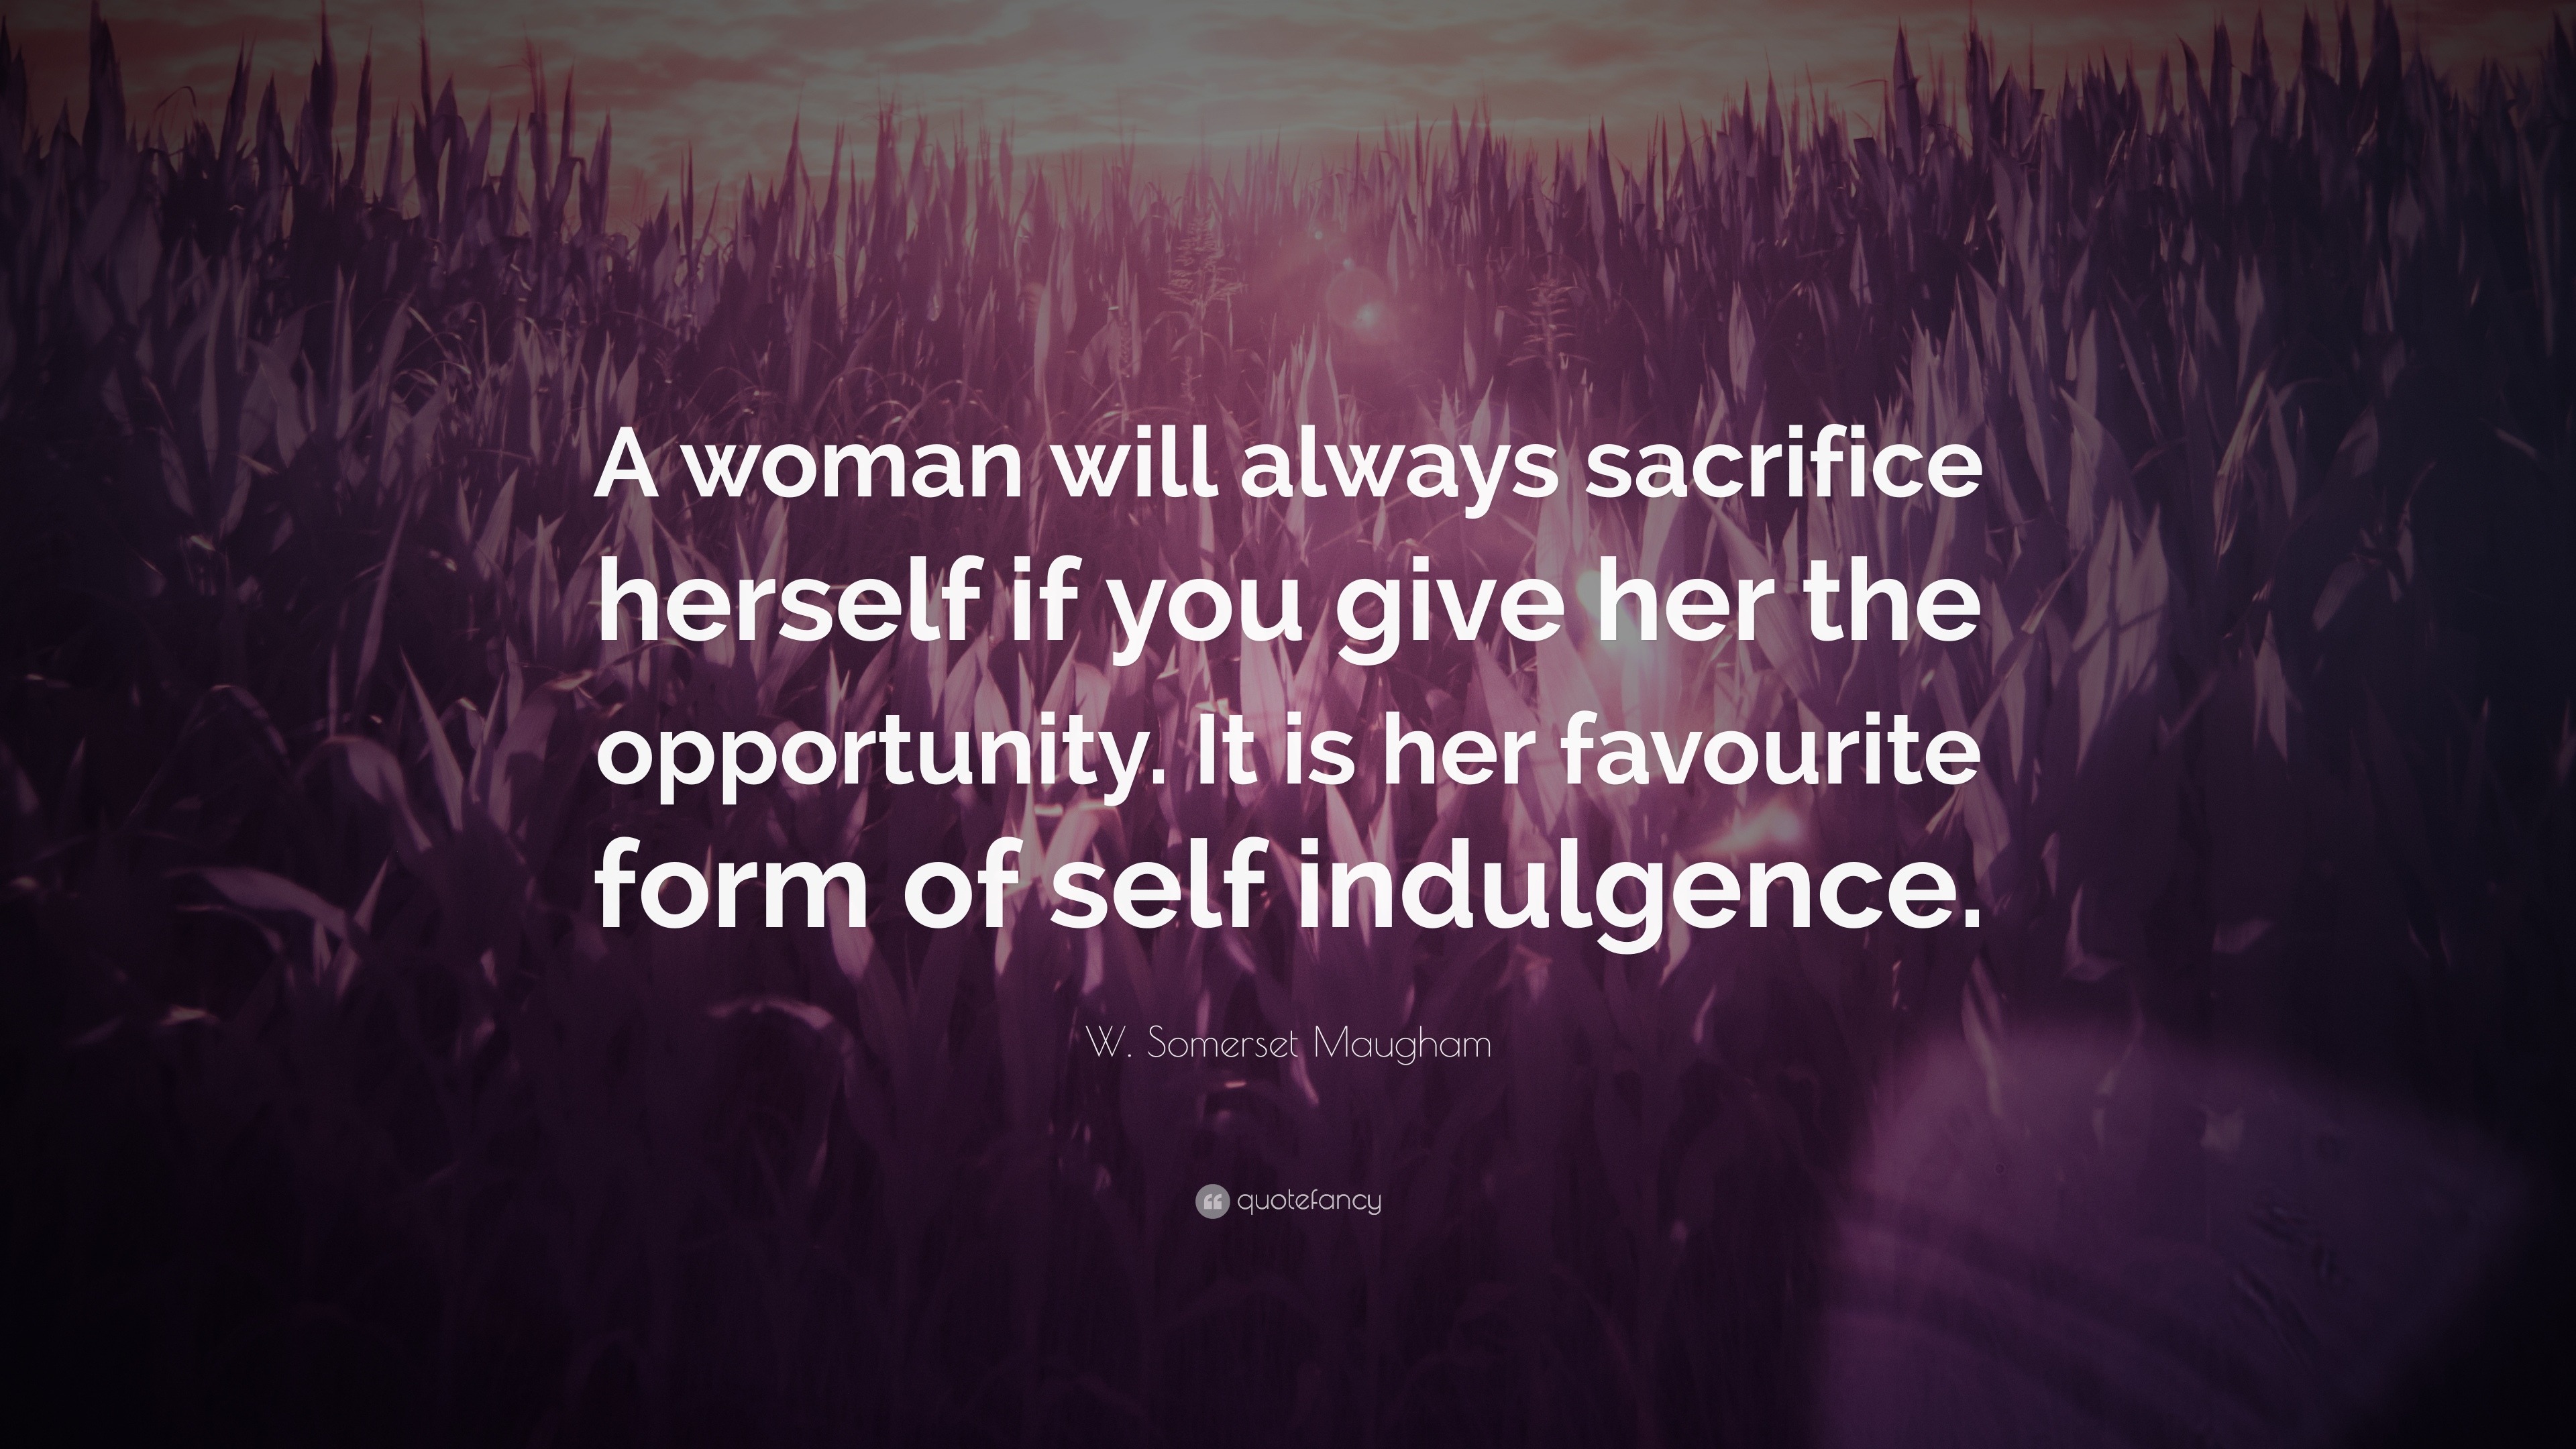 W Somerset Maugham Quote “A woman will always sacrifice herself if you give